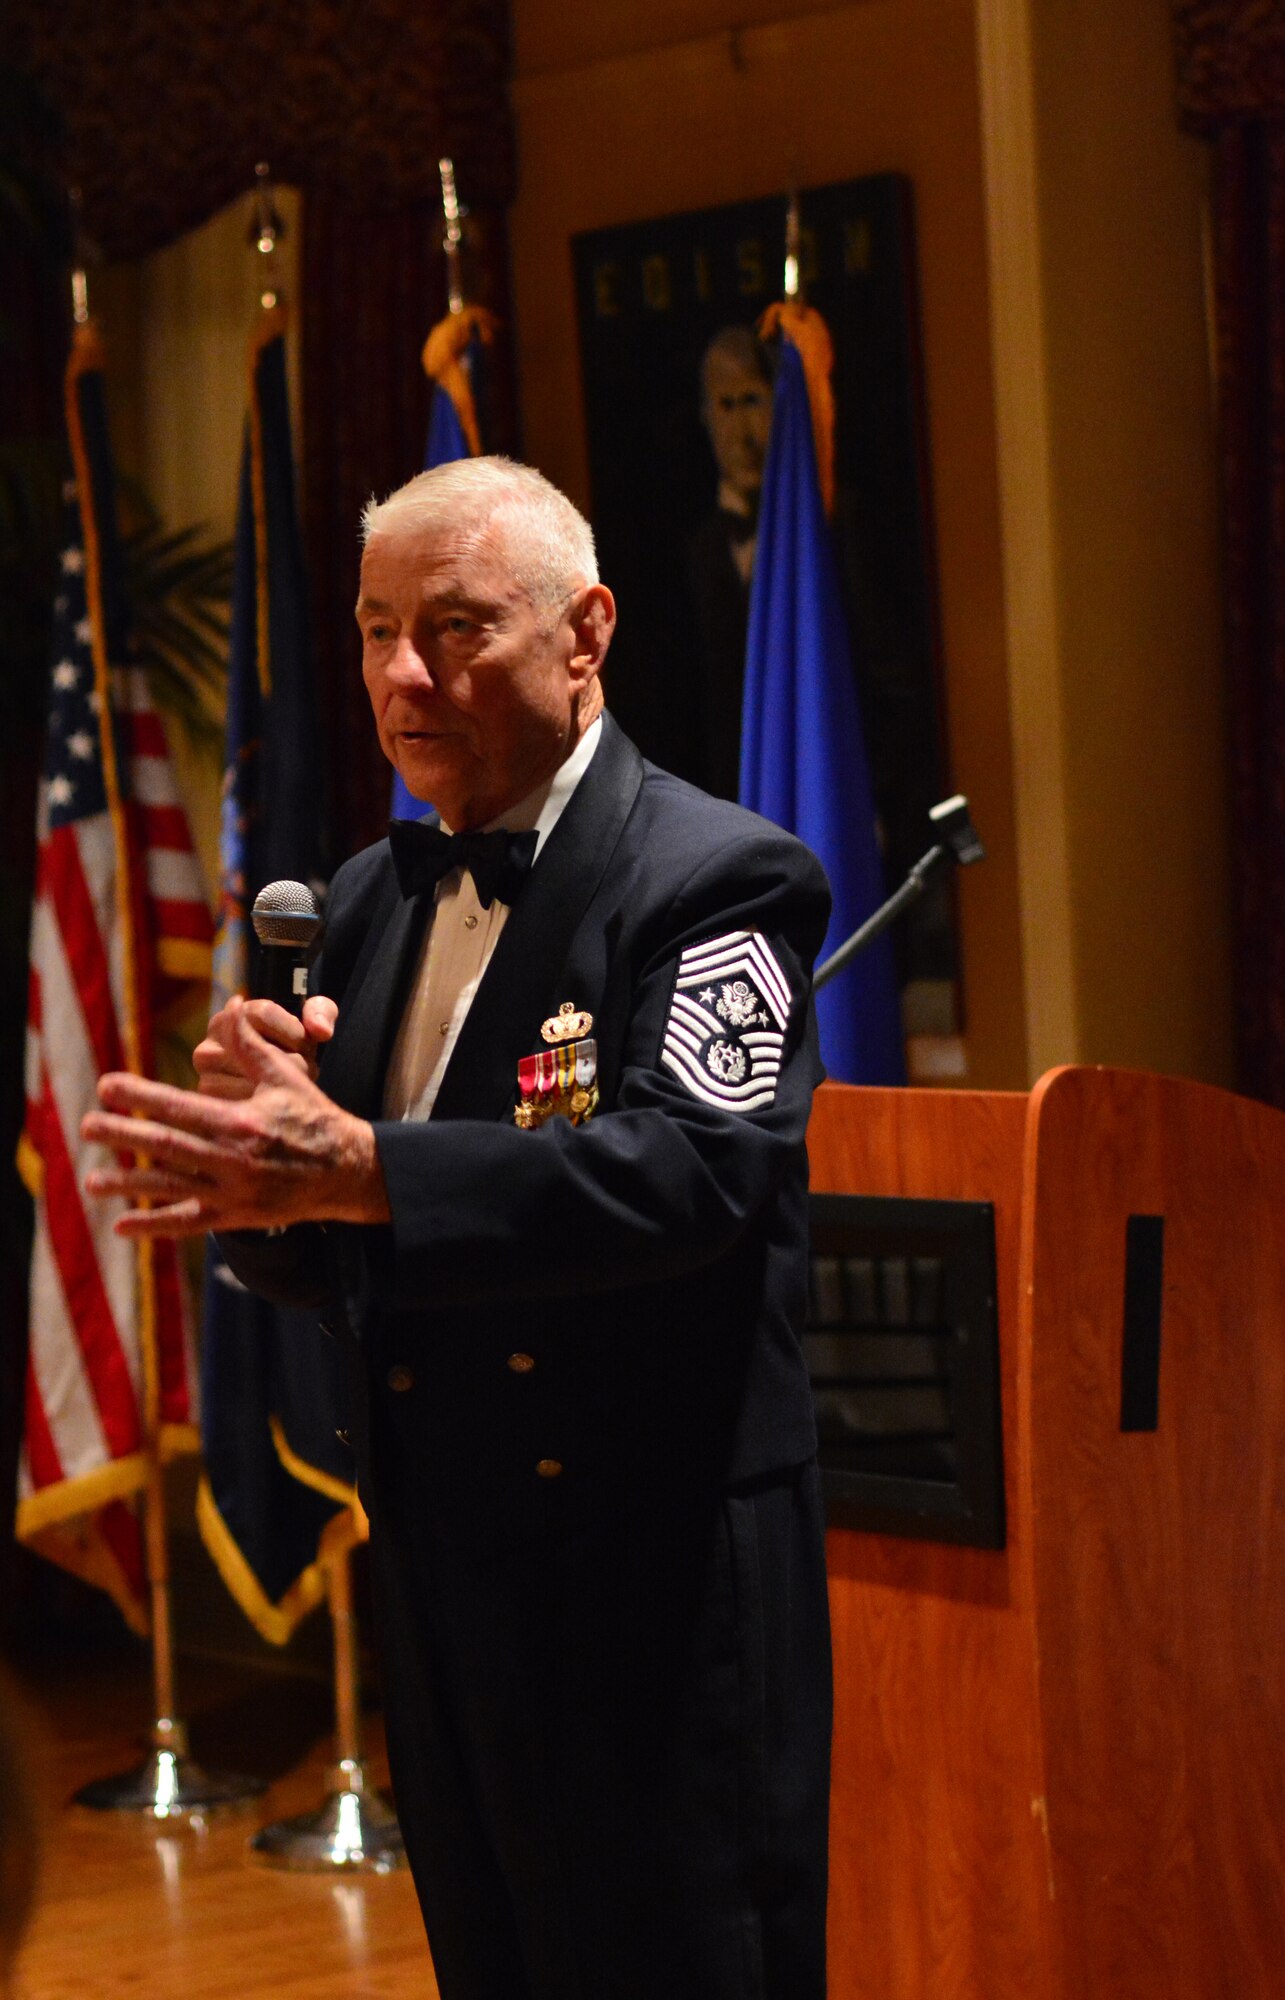 Retired Chief Master Sgt. of the Air Force Robert D. Gaylor speaks at the 109th Airlift Wing's Senior Noncommissioned Officer Induction Ceremony at Schenectady County Community College, Schenectady, New York, on Sept. 25, 2014. Gaylor visited Stratton Air National Guard Base earlier in the day to speak to a group of enlisted Airmen as well. He joined the Air Force in 1948 and became the fifth chief master sgt. of the Air Force in 1977. (U.S. Air National Guard photo by Master Sgt. William Gizara/Released)